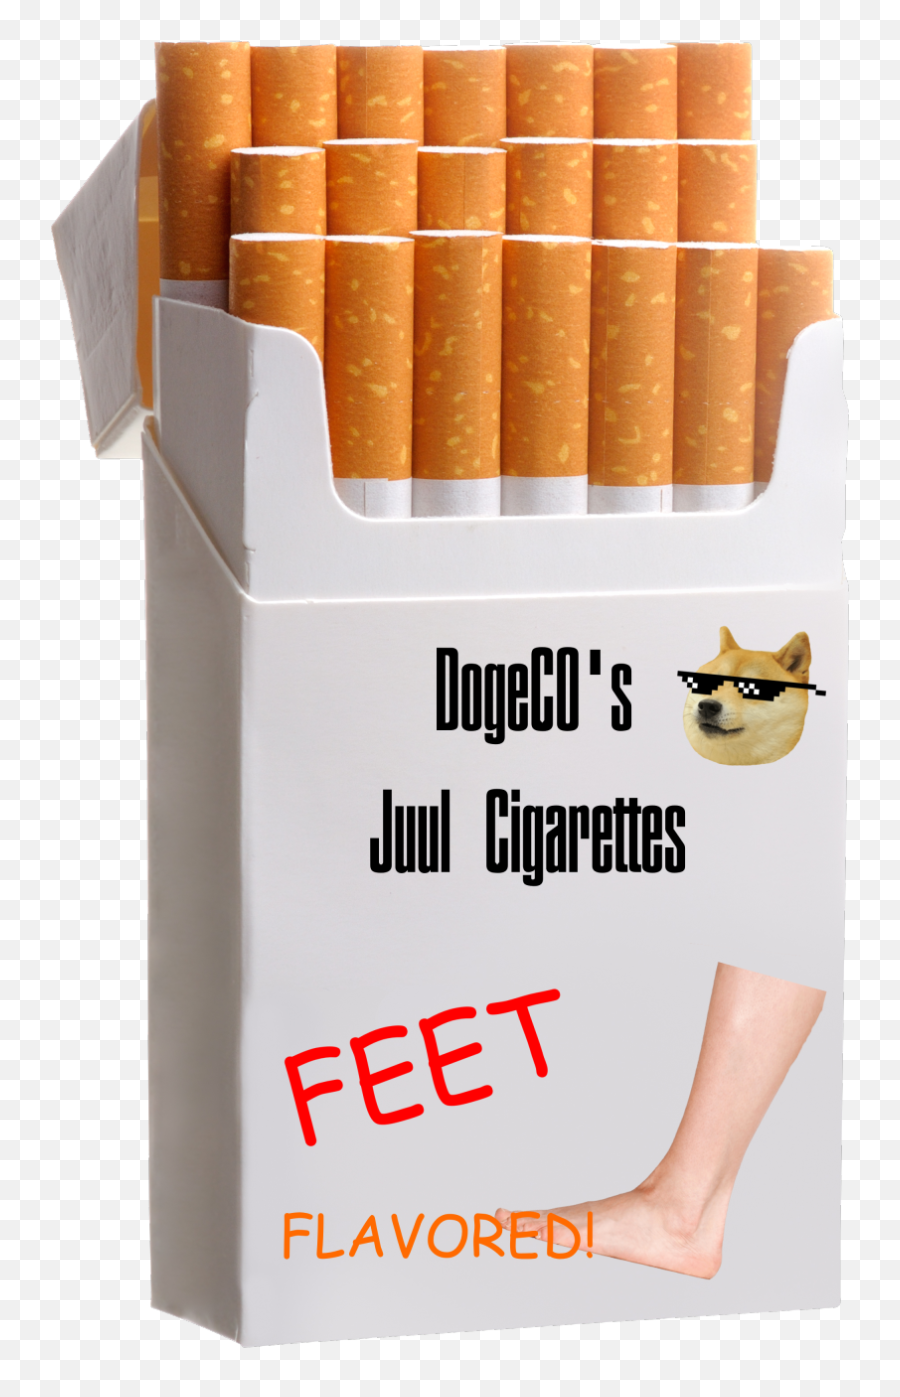 Dogecou0027s Juul Cigarettes Feet Flavored Png In Comments - Pack Of Cigarettes Png,Tobacco Png